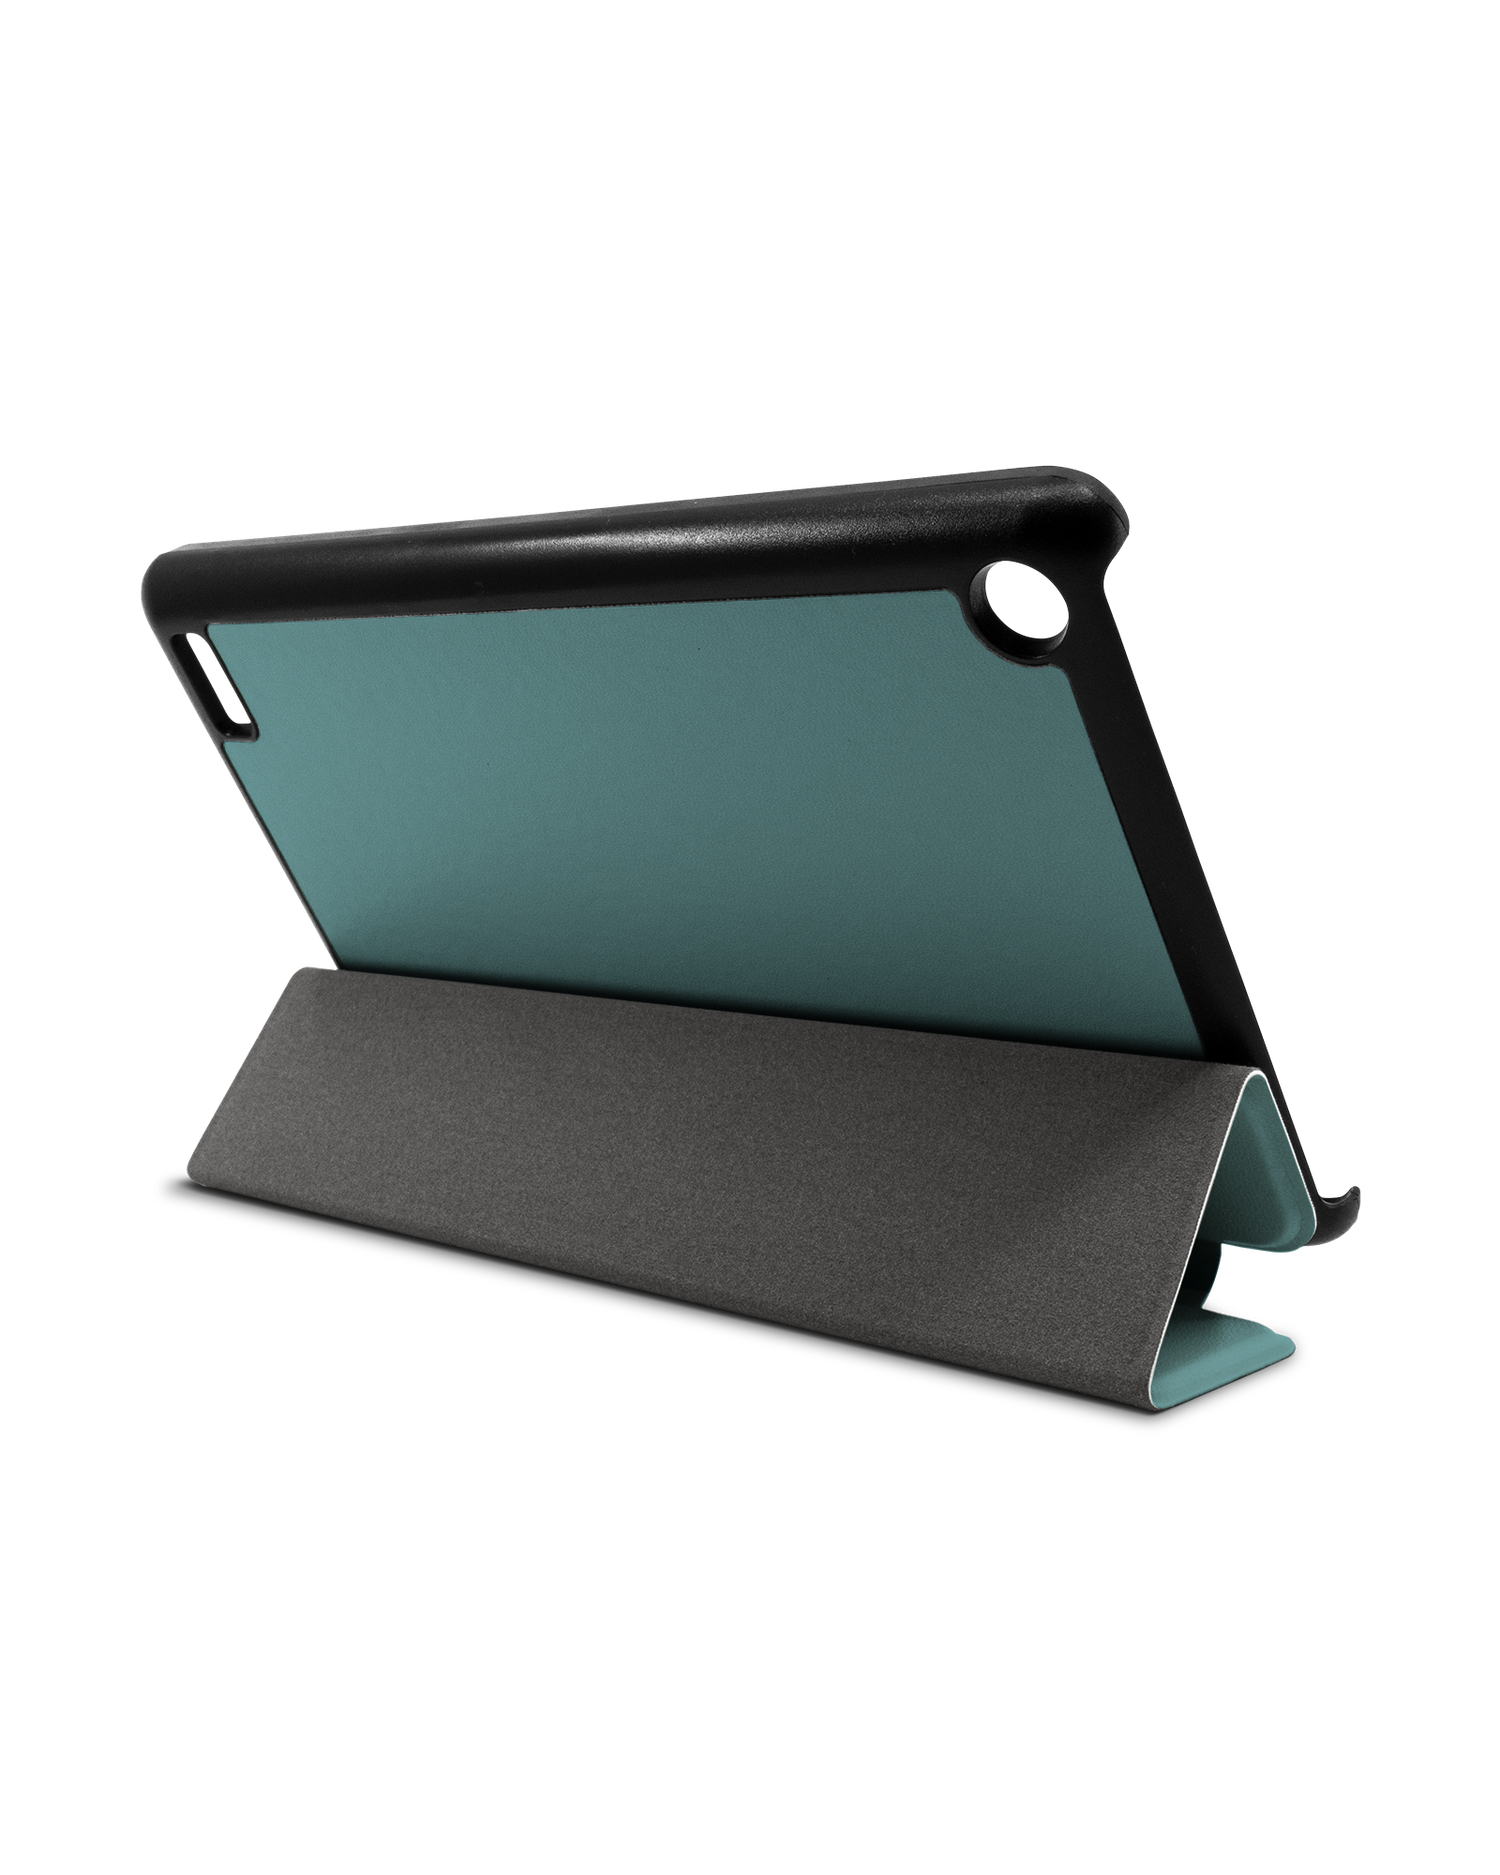 TURQUOISE Tablet Smart Case for Amazon Fire 7: Used as Stand